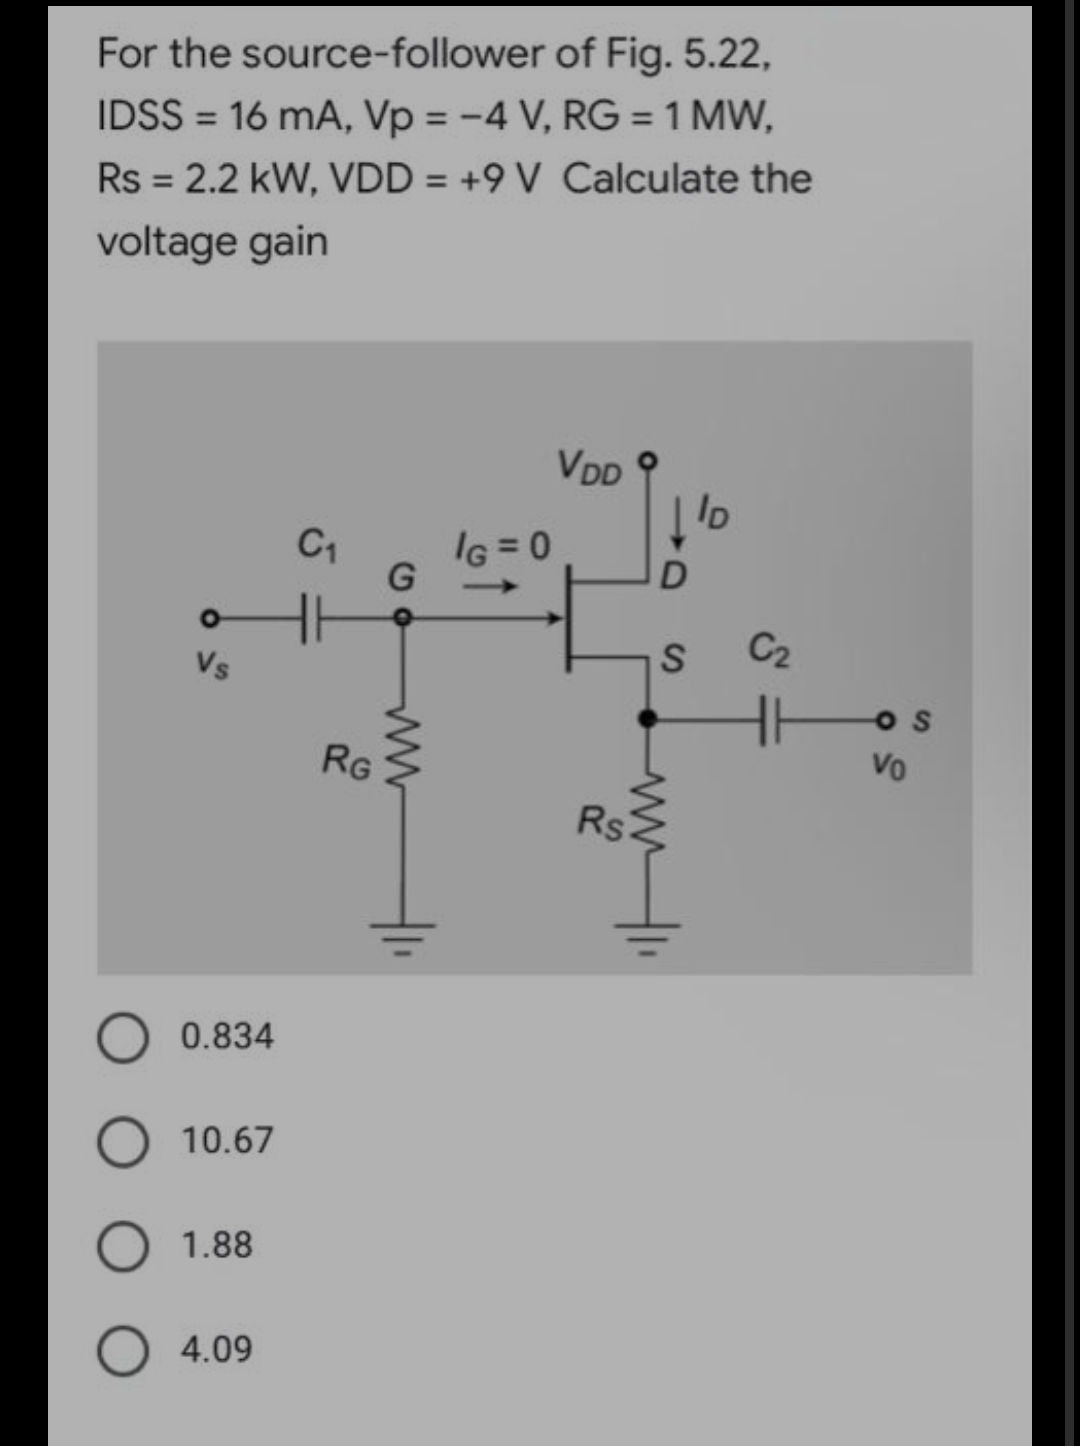 For the source-follower of Fig. 5.22,
IDSS = 16 mA, Vp = -4 V, RG = 1 MW,
Rs = 2.2 kW, VDD = +9 V Calculate the
voltage gain
VDD
Vs
0.834
O 10.67
1.88
O 4.09
C₁
RG
G
IG=0
tam
Rs
ID
S C₂
Vo
S